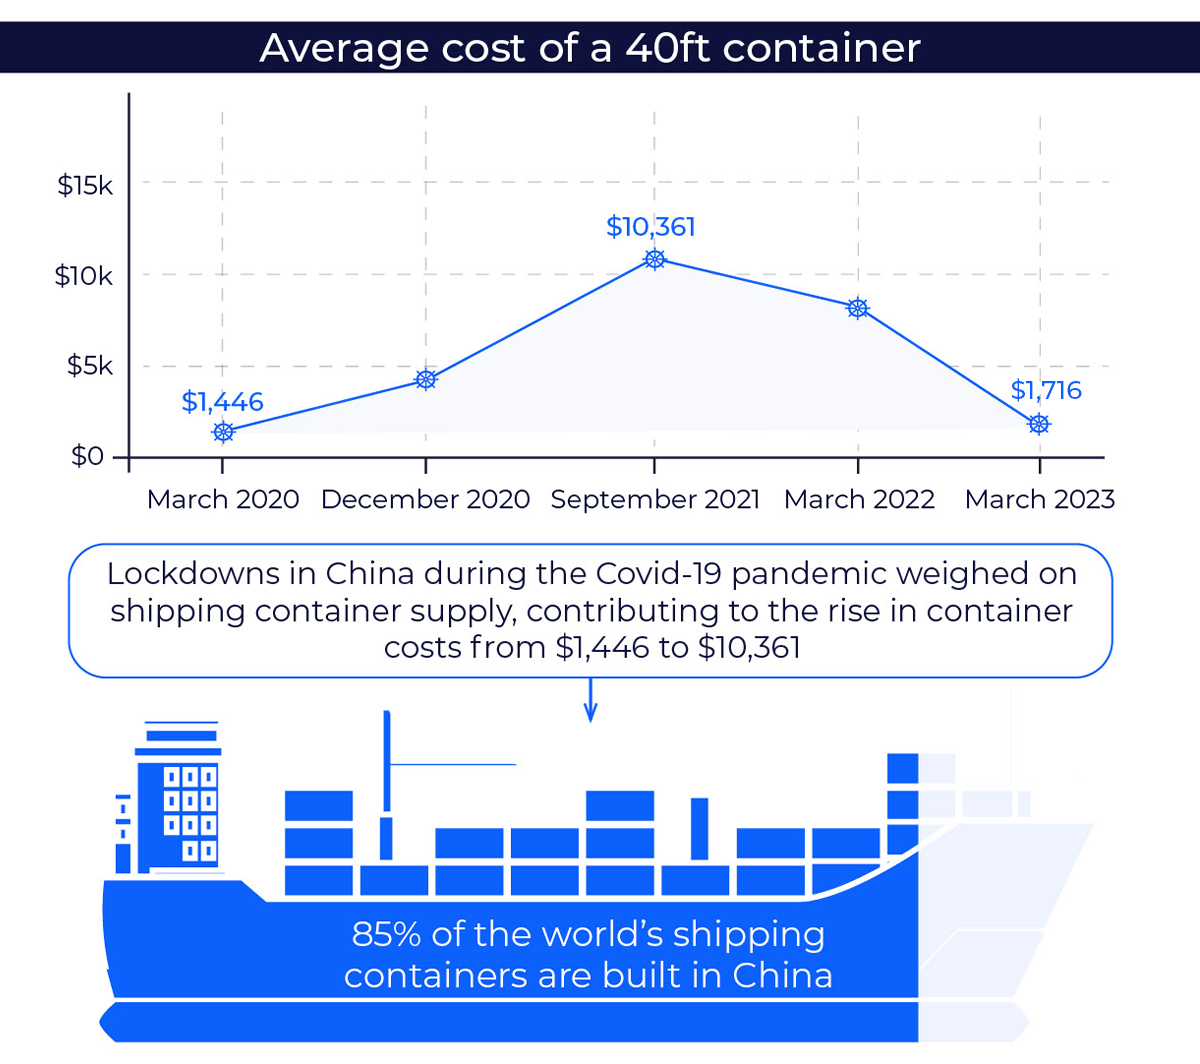 Covid-19 impact on shipping container costs